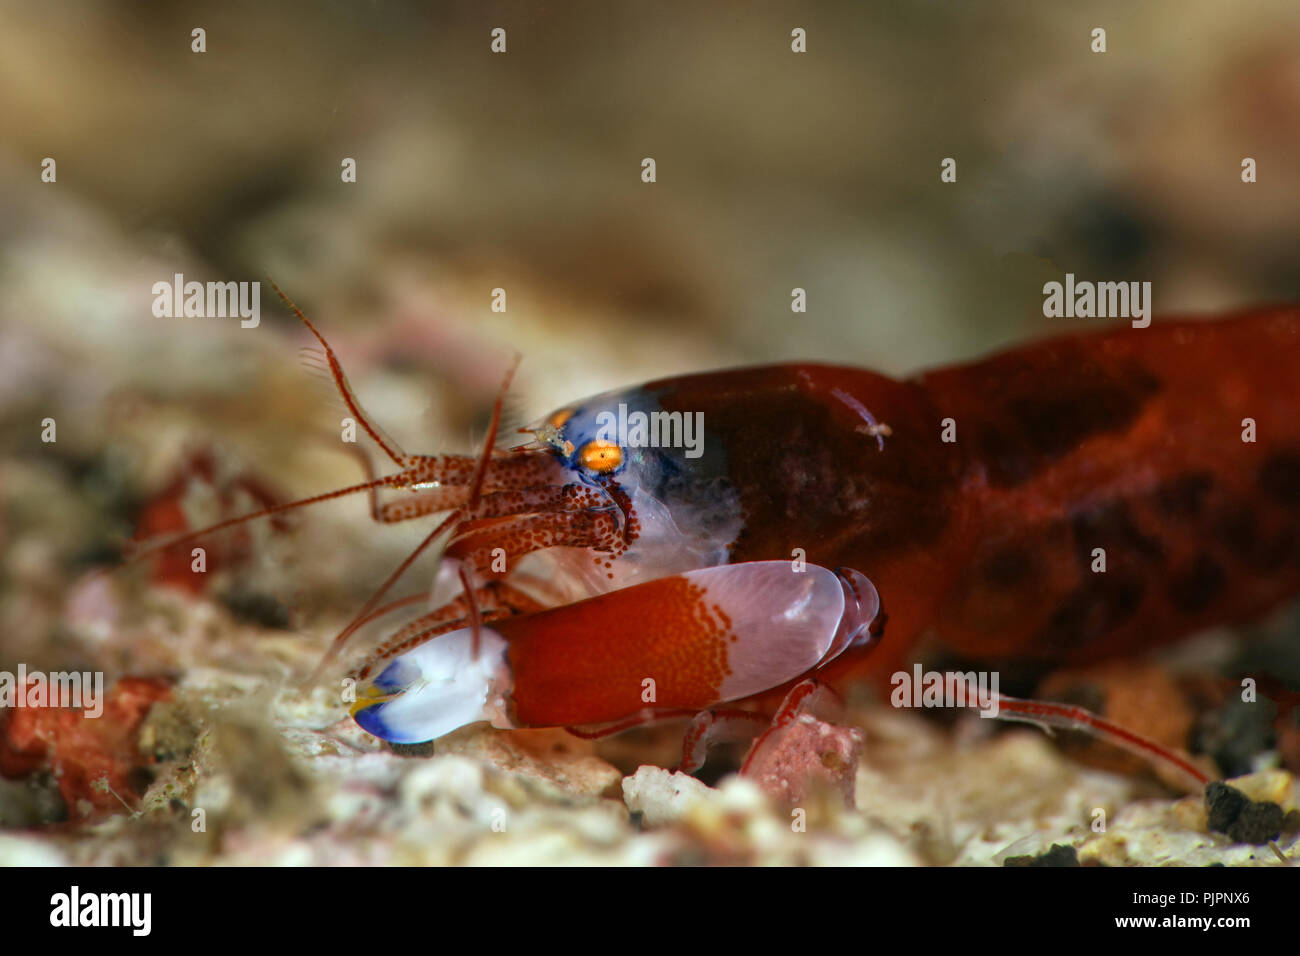 Modest Snapping Shrimp (Synalpheus modestus). Picture was taken in Lembeh strait, Indonesia Stock Photo